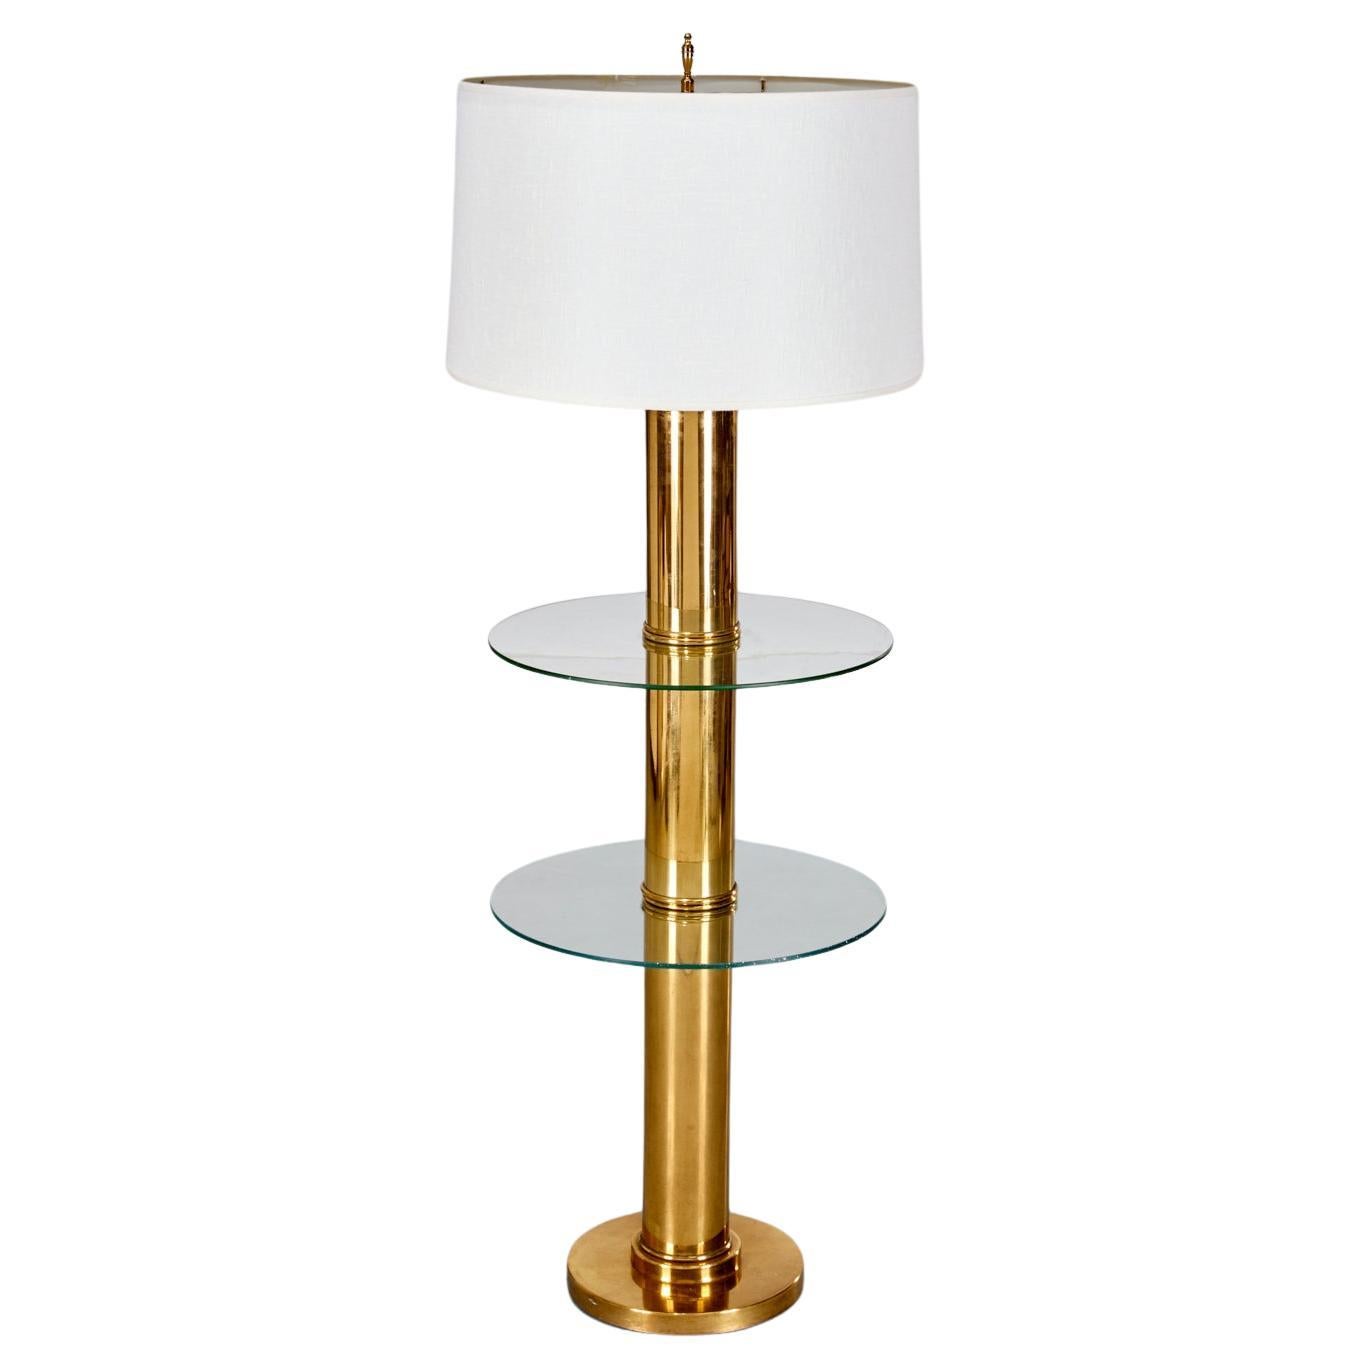 1970's Brass and Glass Two-Tier Floor Lamp with White Linen Shade